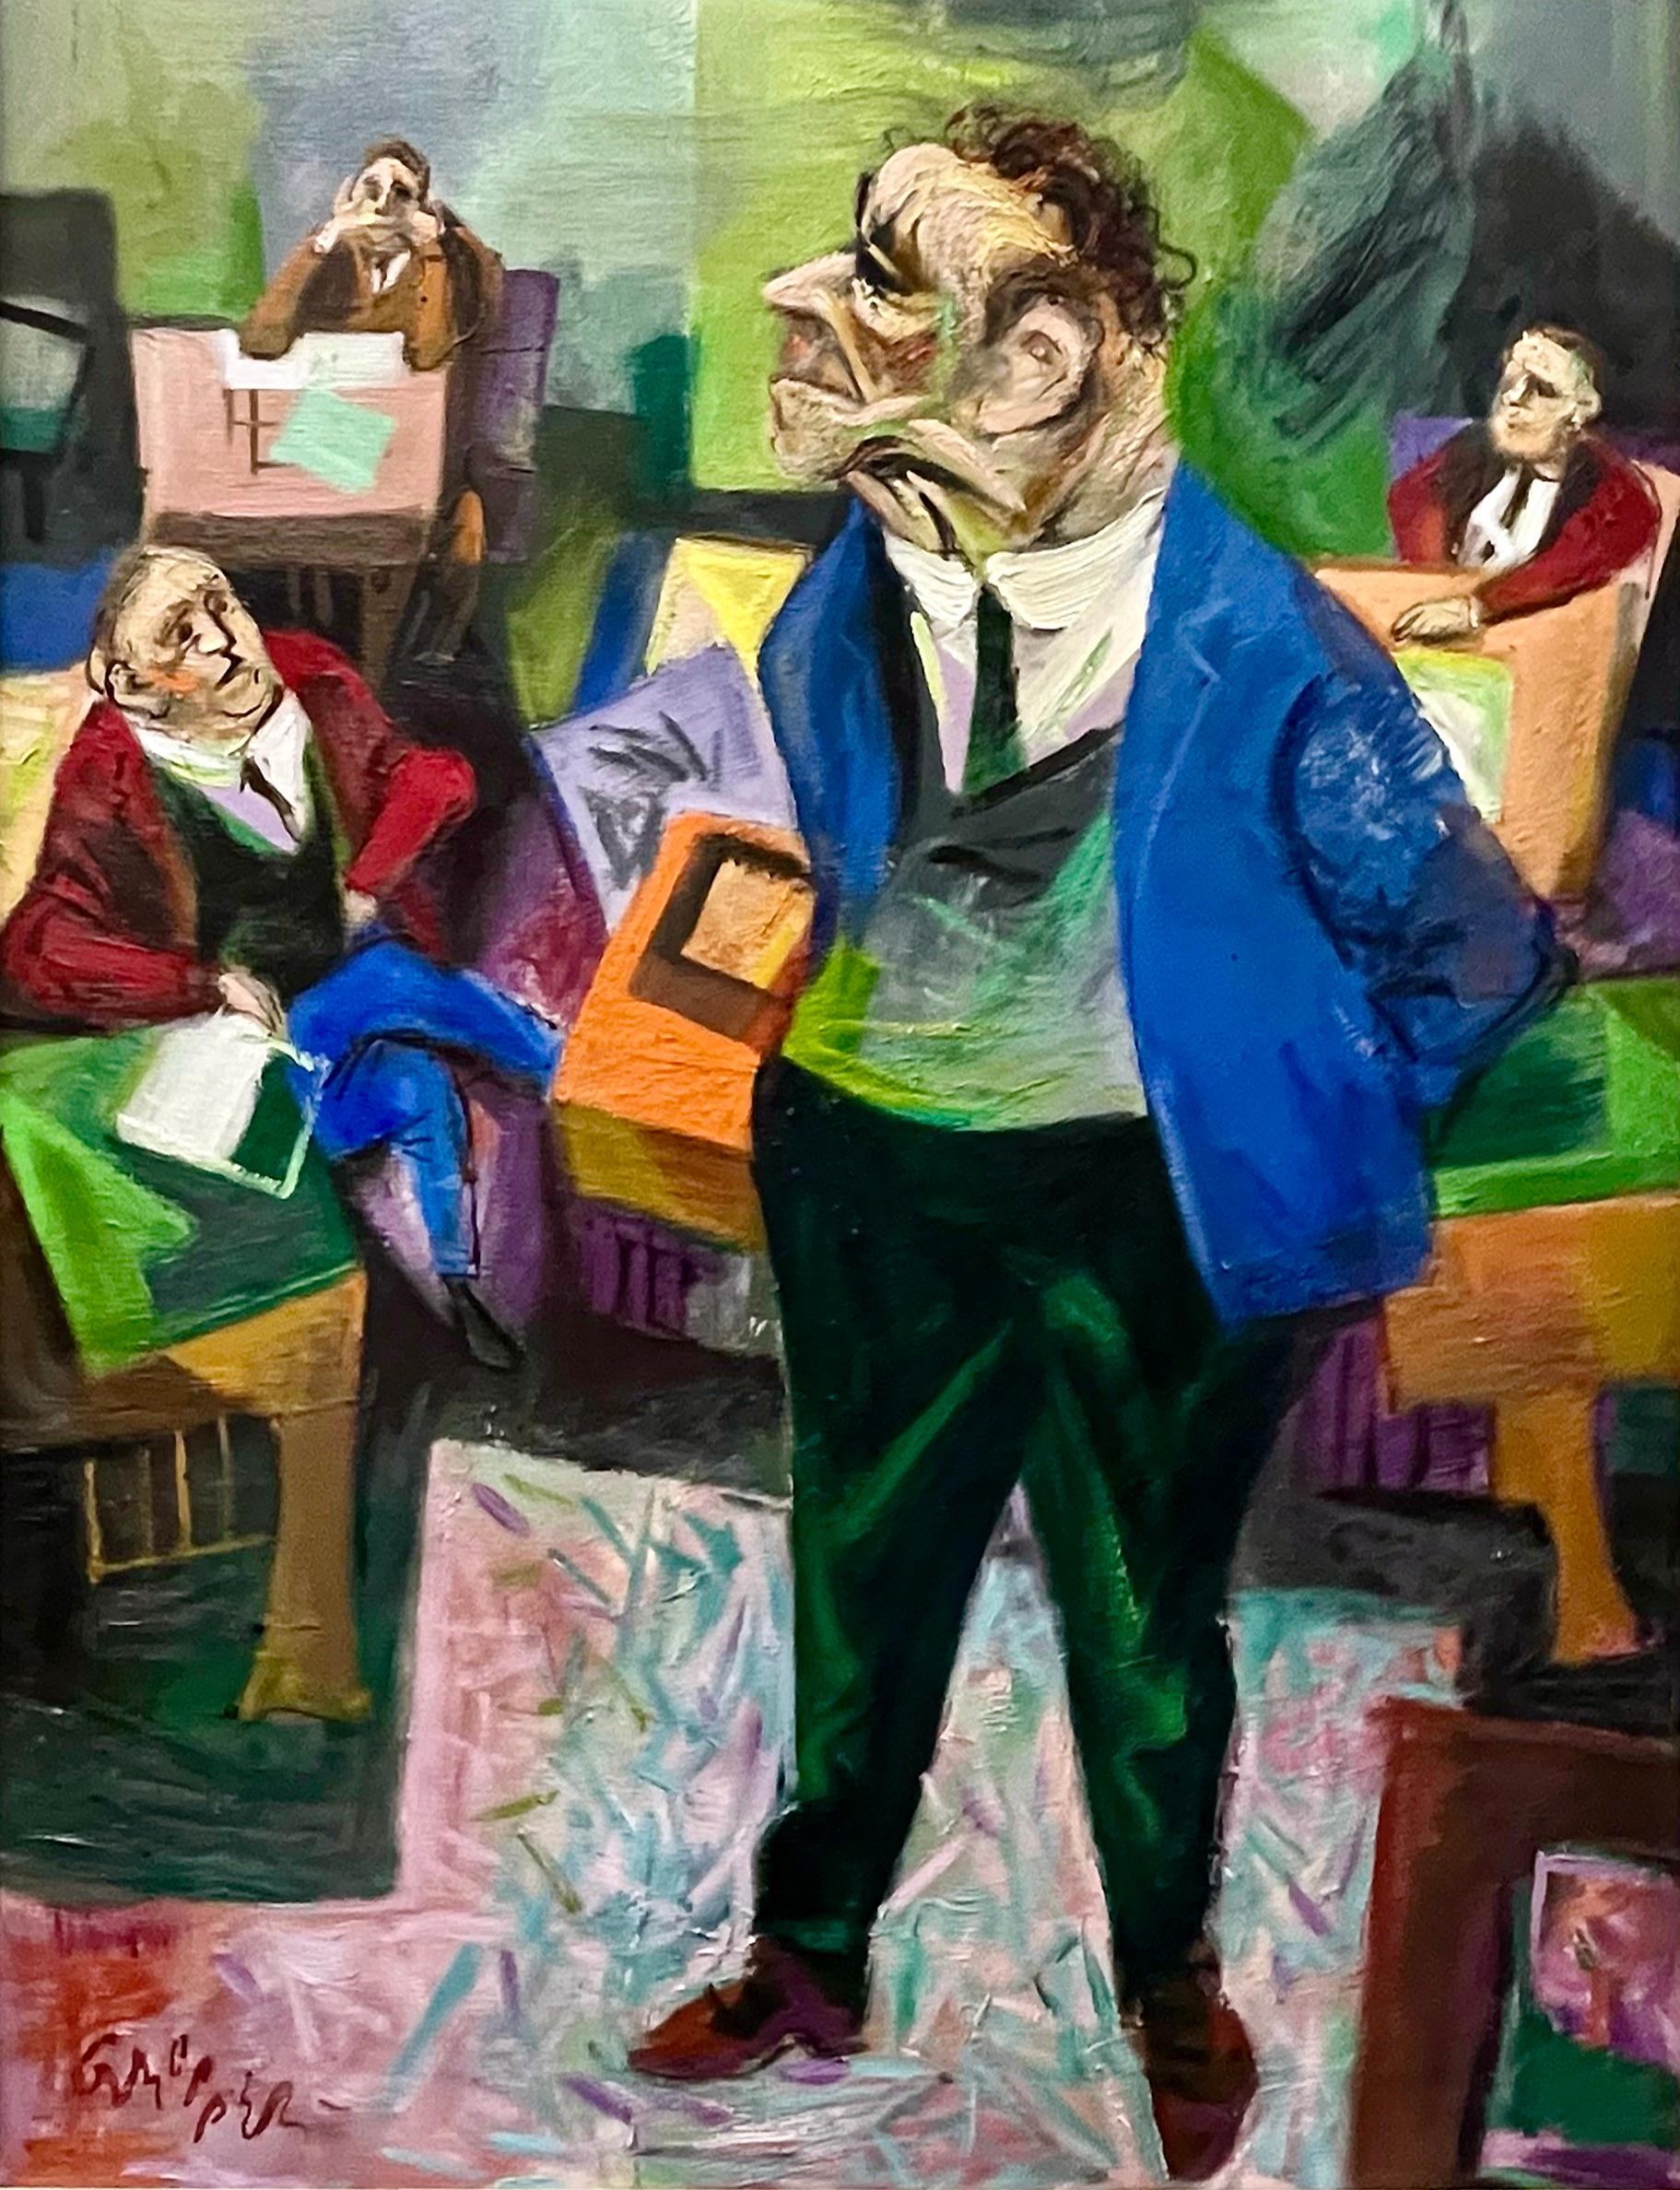 William Gropper Figurative Painting - "Committee Chair" Mid 20th Century American Scene Modern Contemporary Political